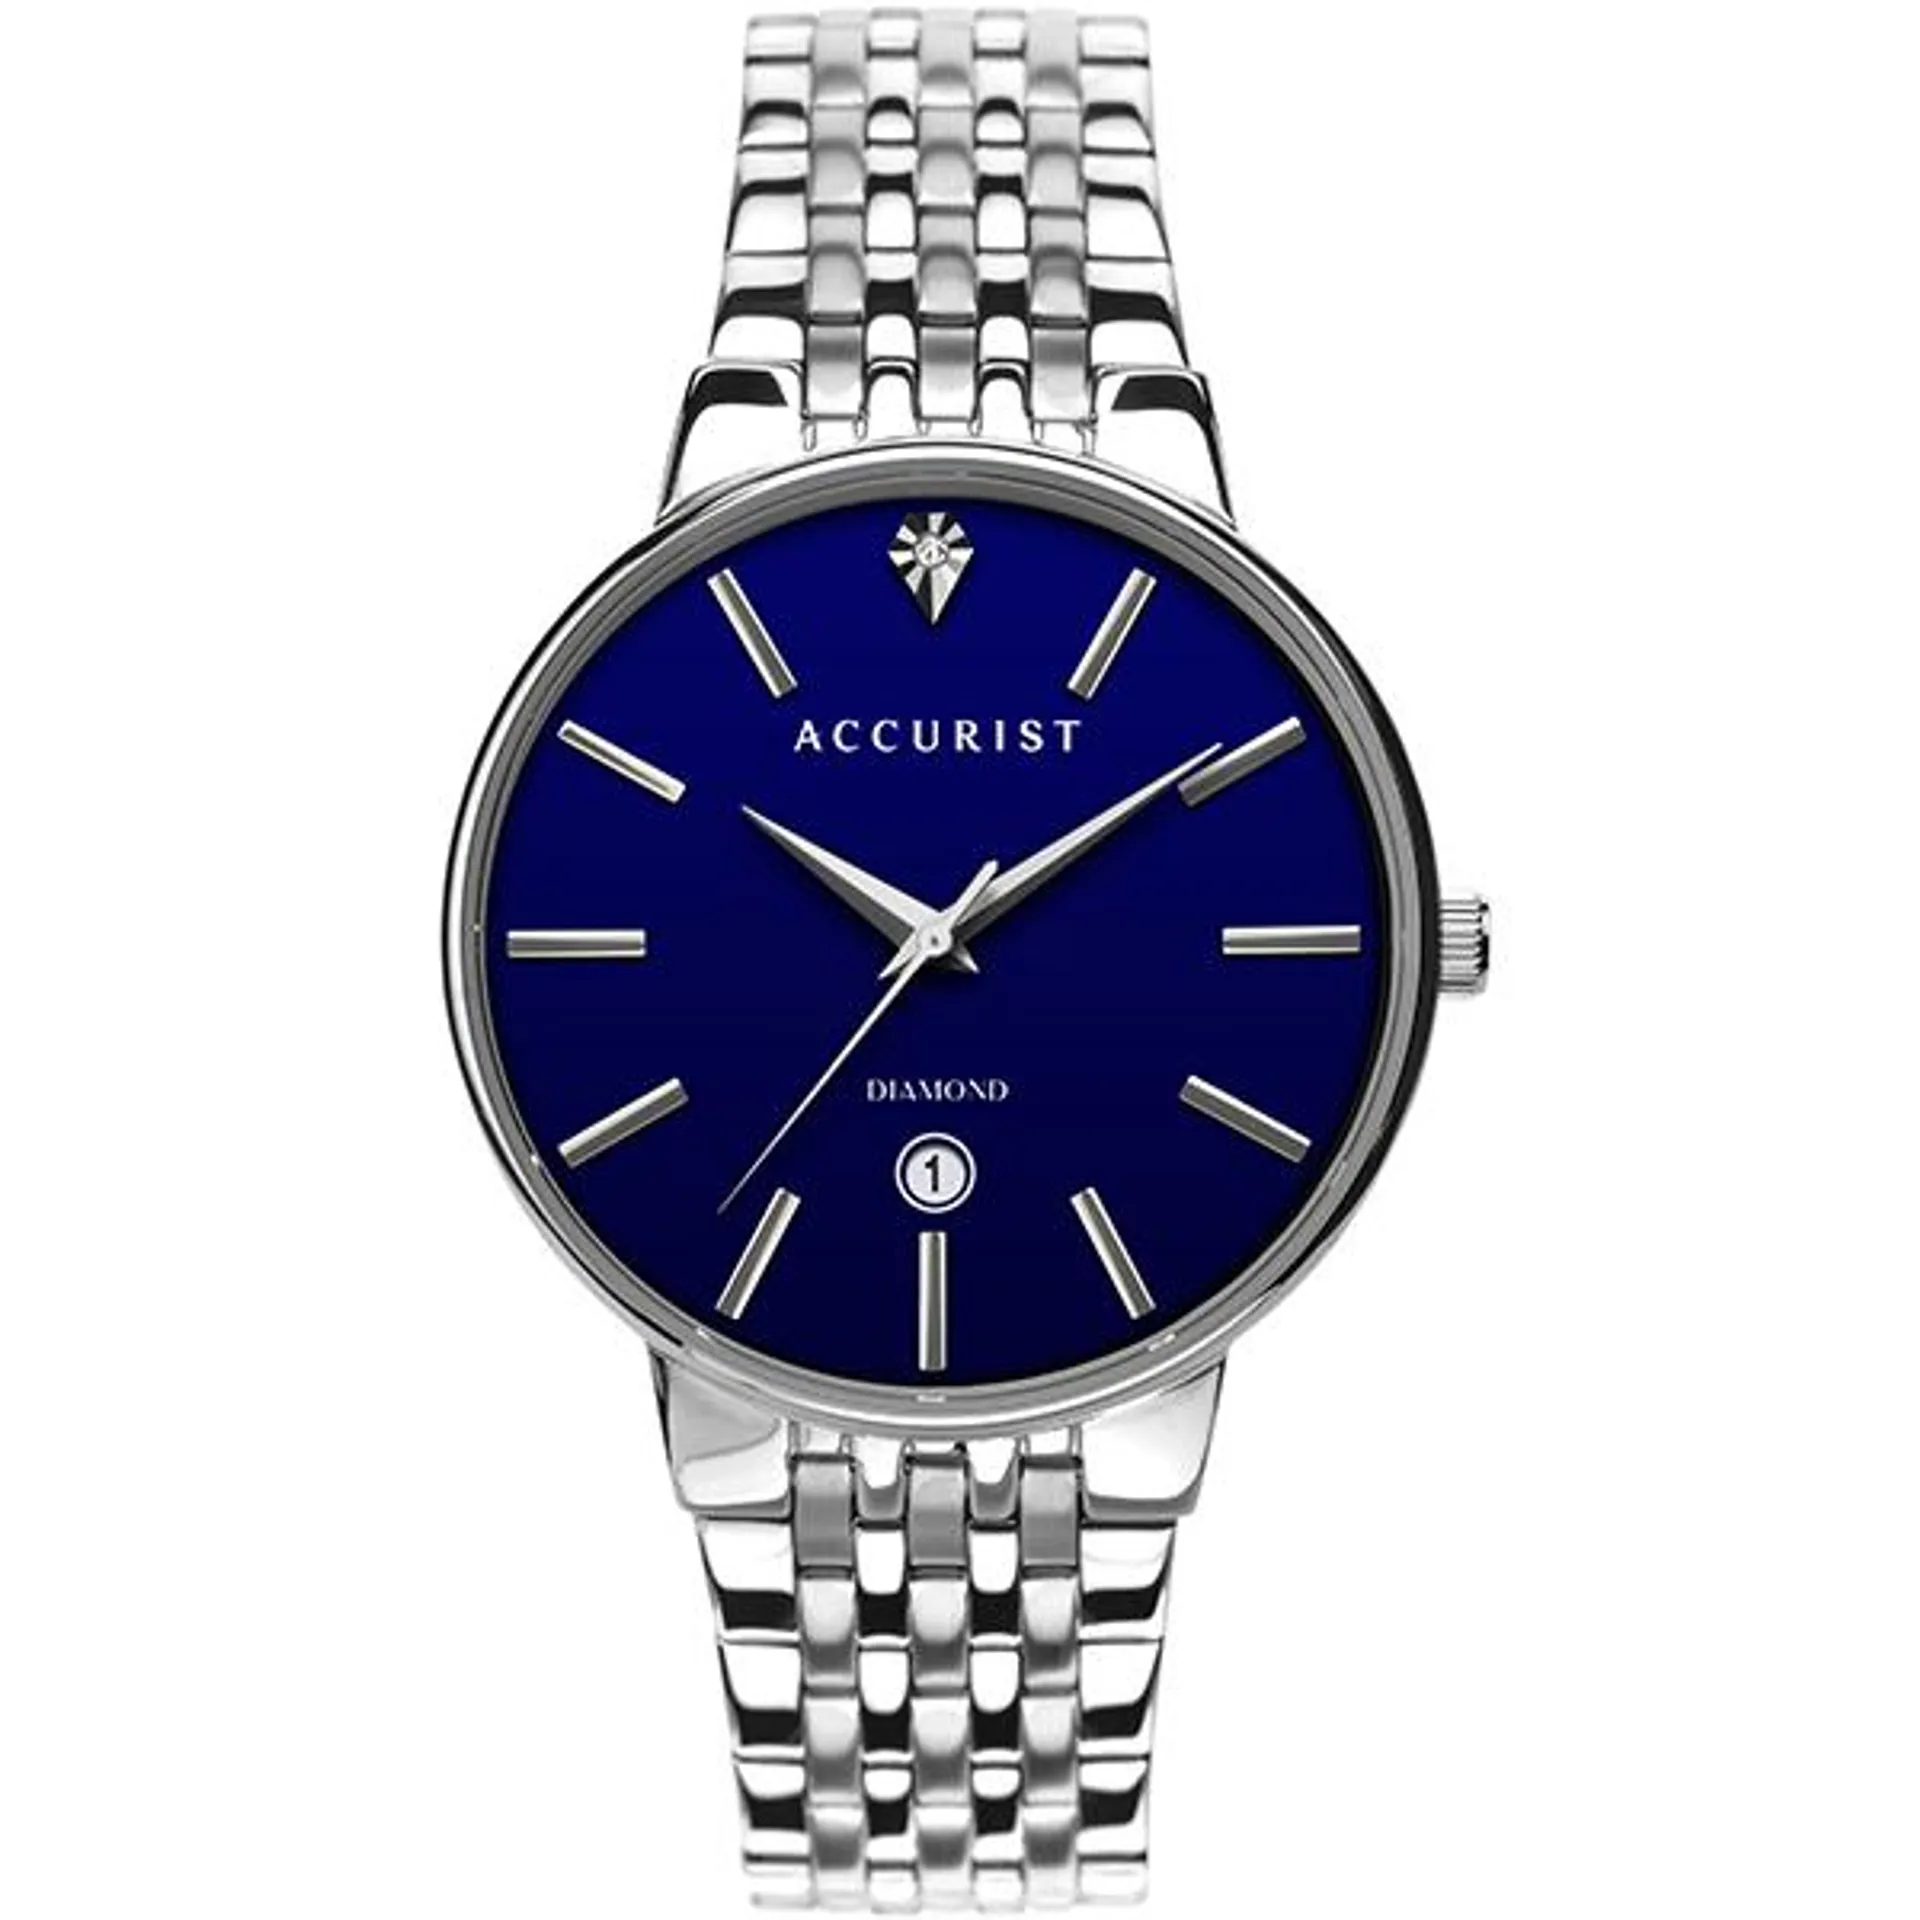 Accurist Gents Diamond Watch with Stainless Steel Bracelet